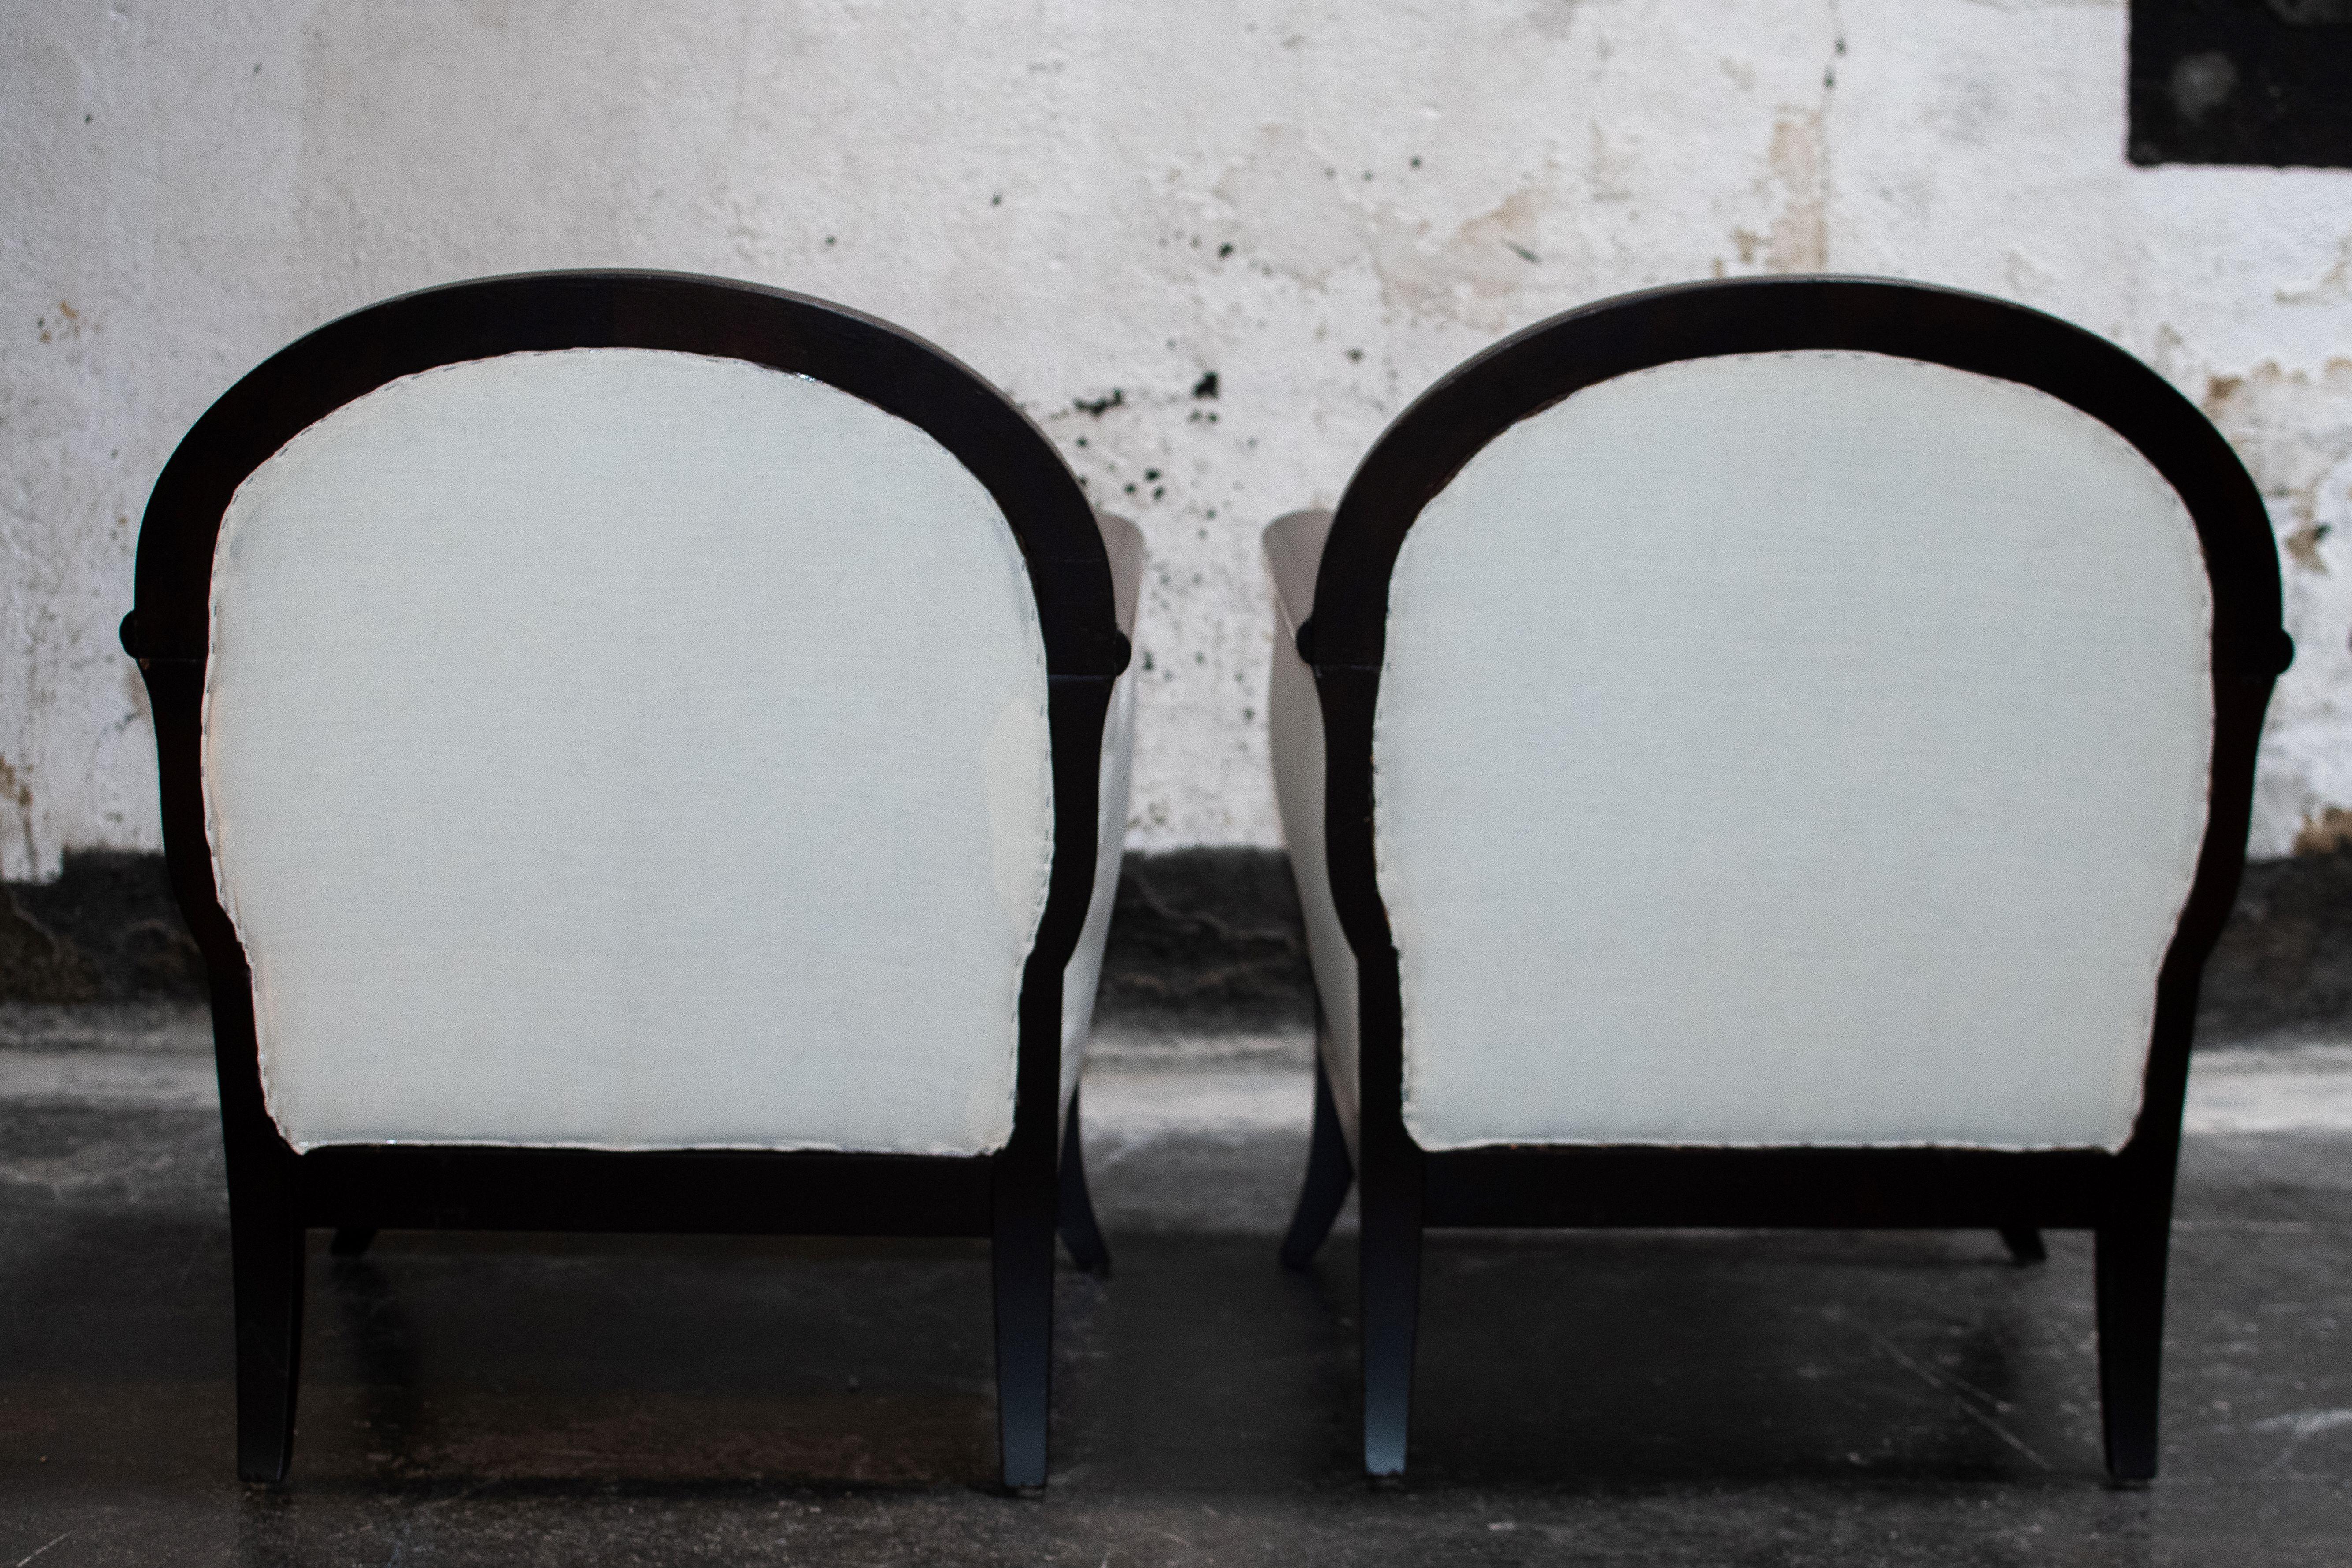 Swedish Pair of Neoclassical Revival Lounge Chairs - COM Ready For Sale